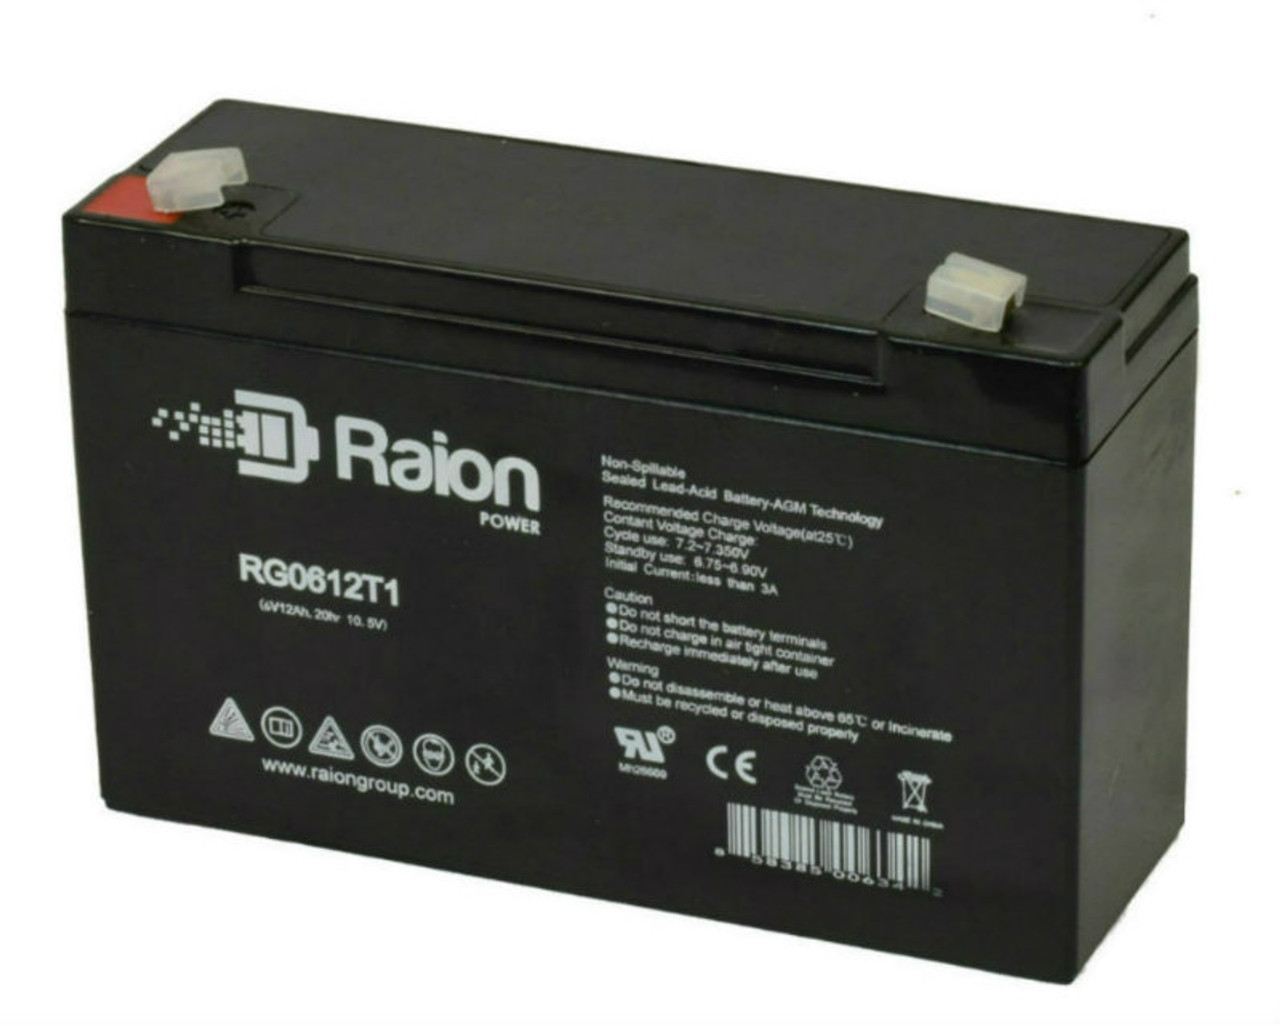 Raion Power RG06120T1 Replacement Battery for Himalaya 3FM10